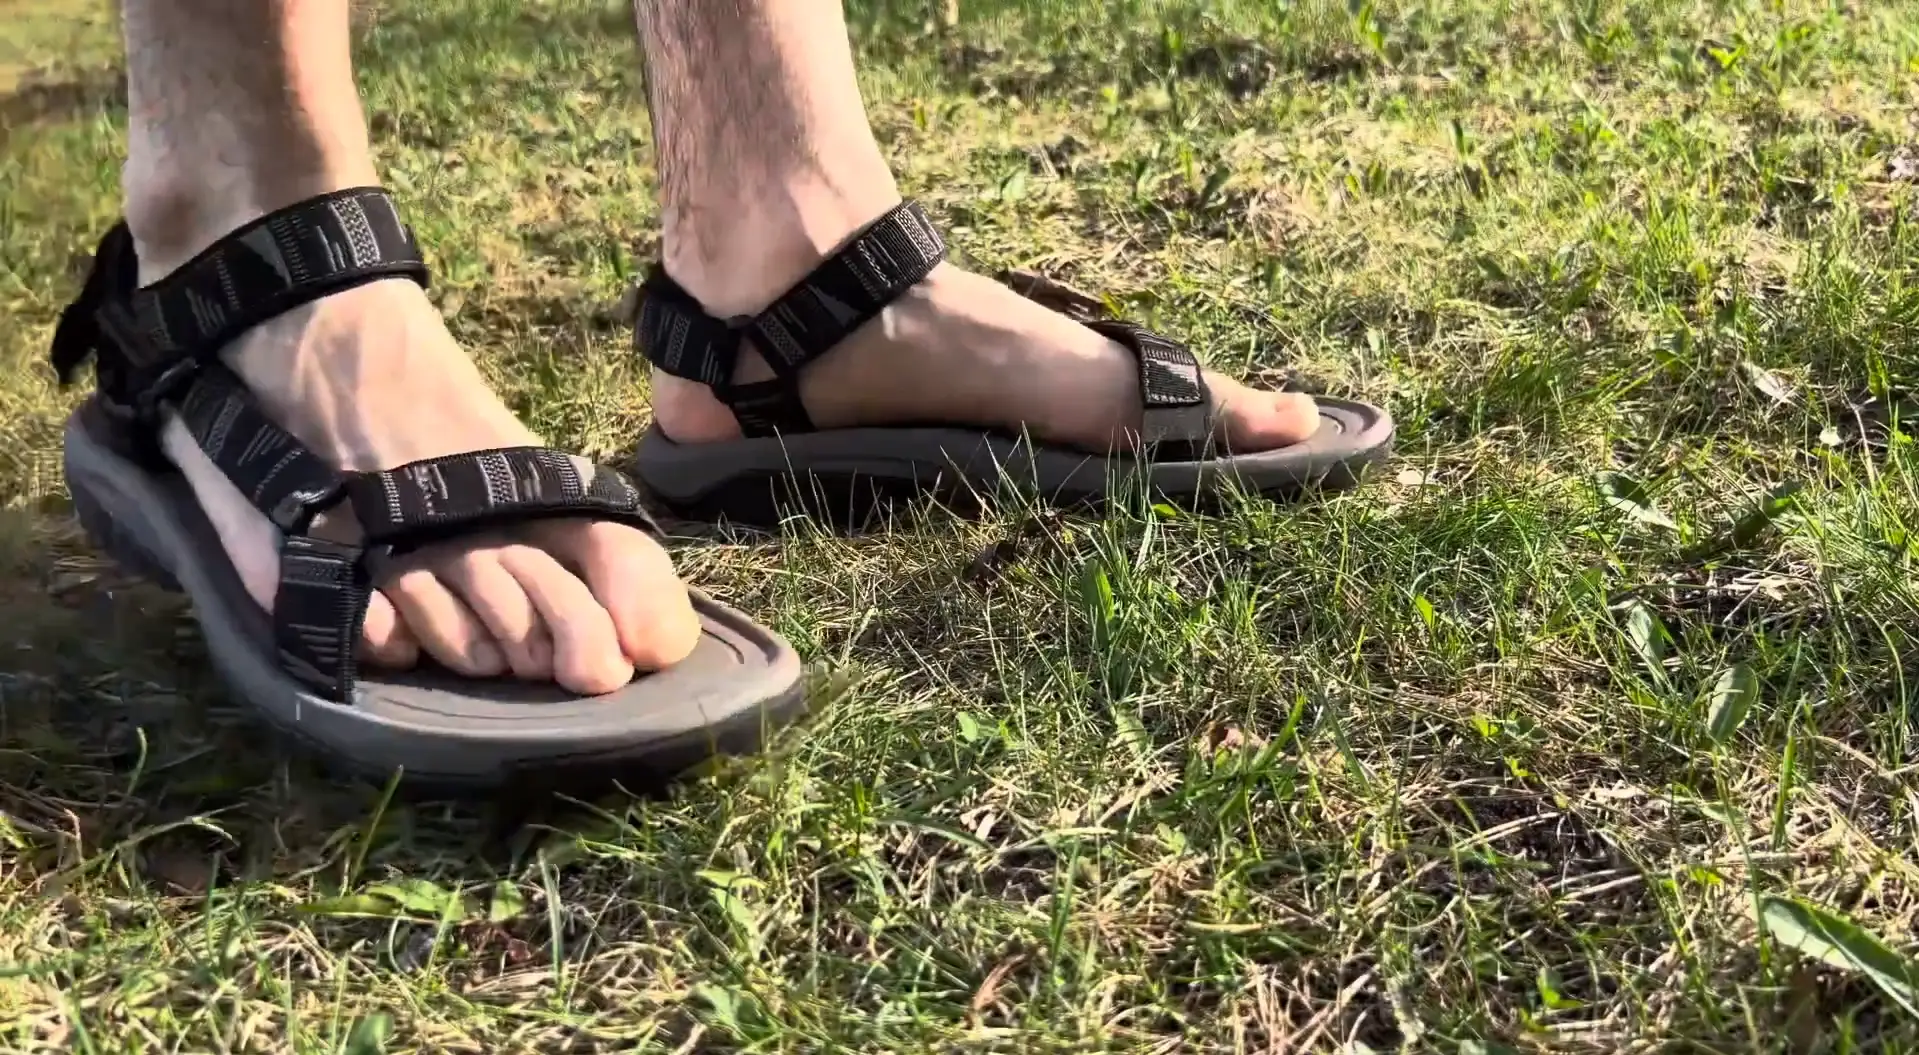 What are Tevas good for?